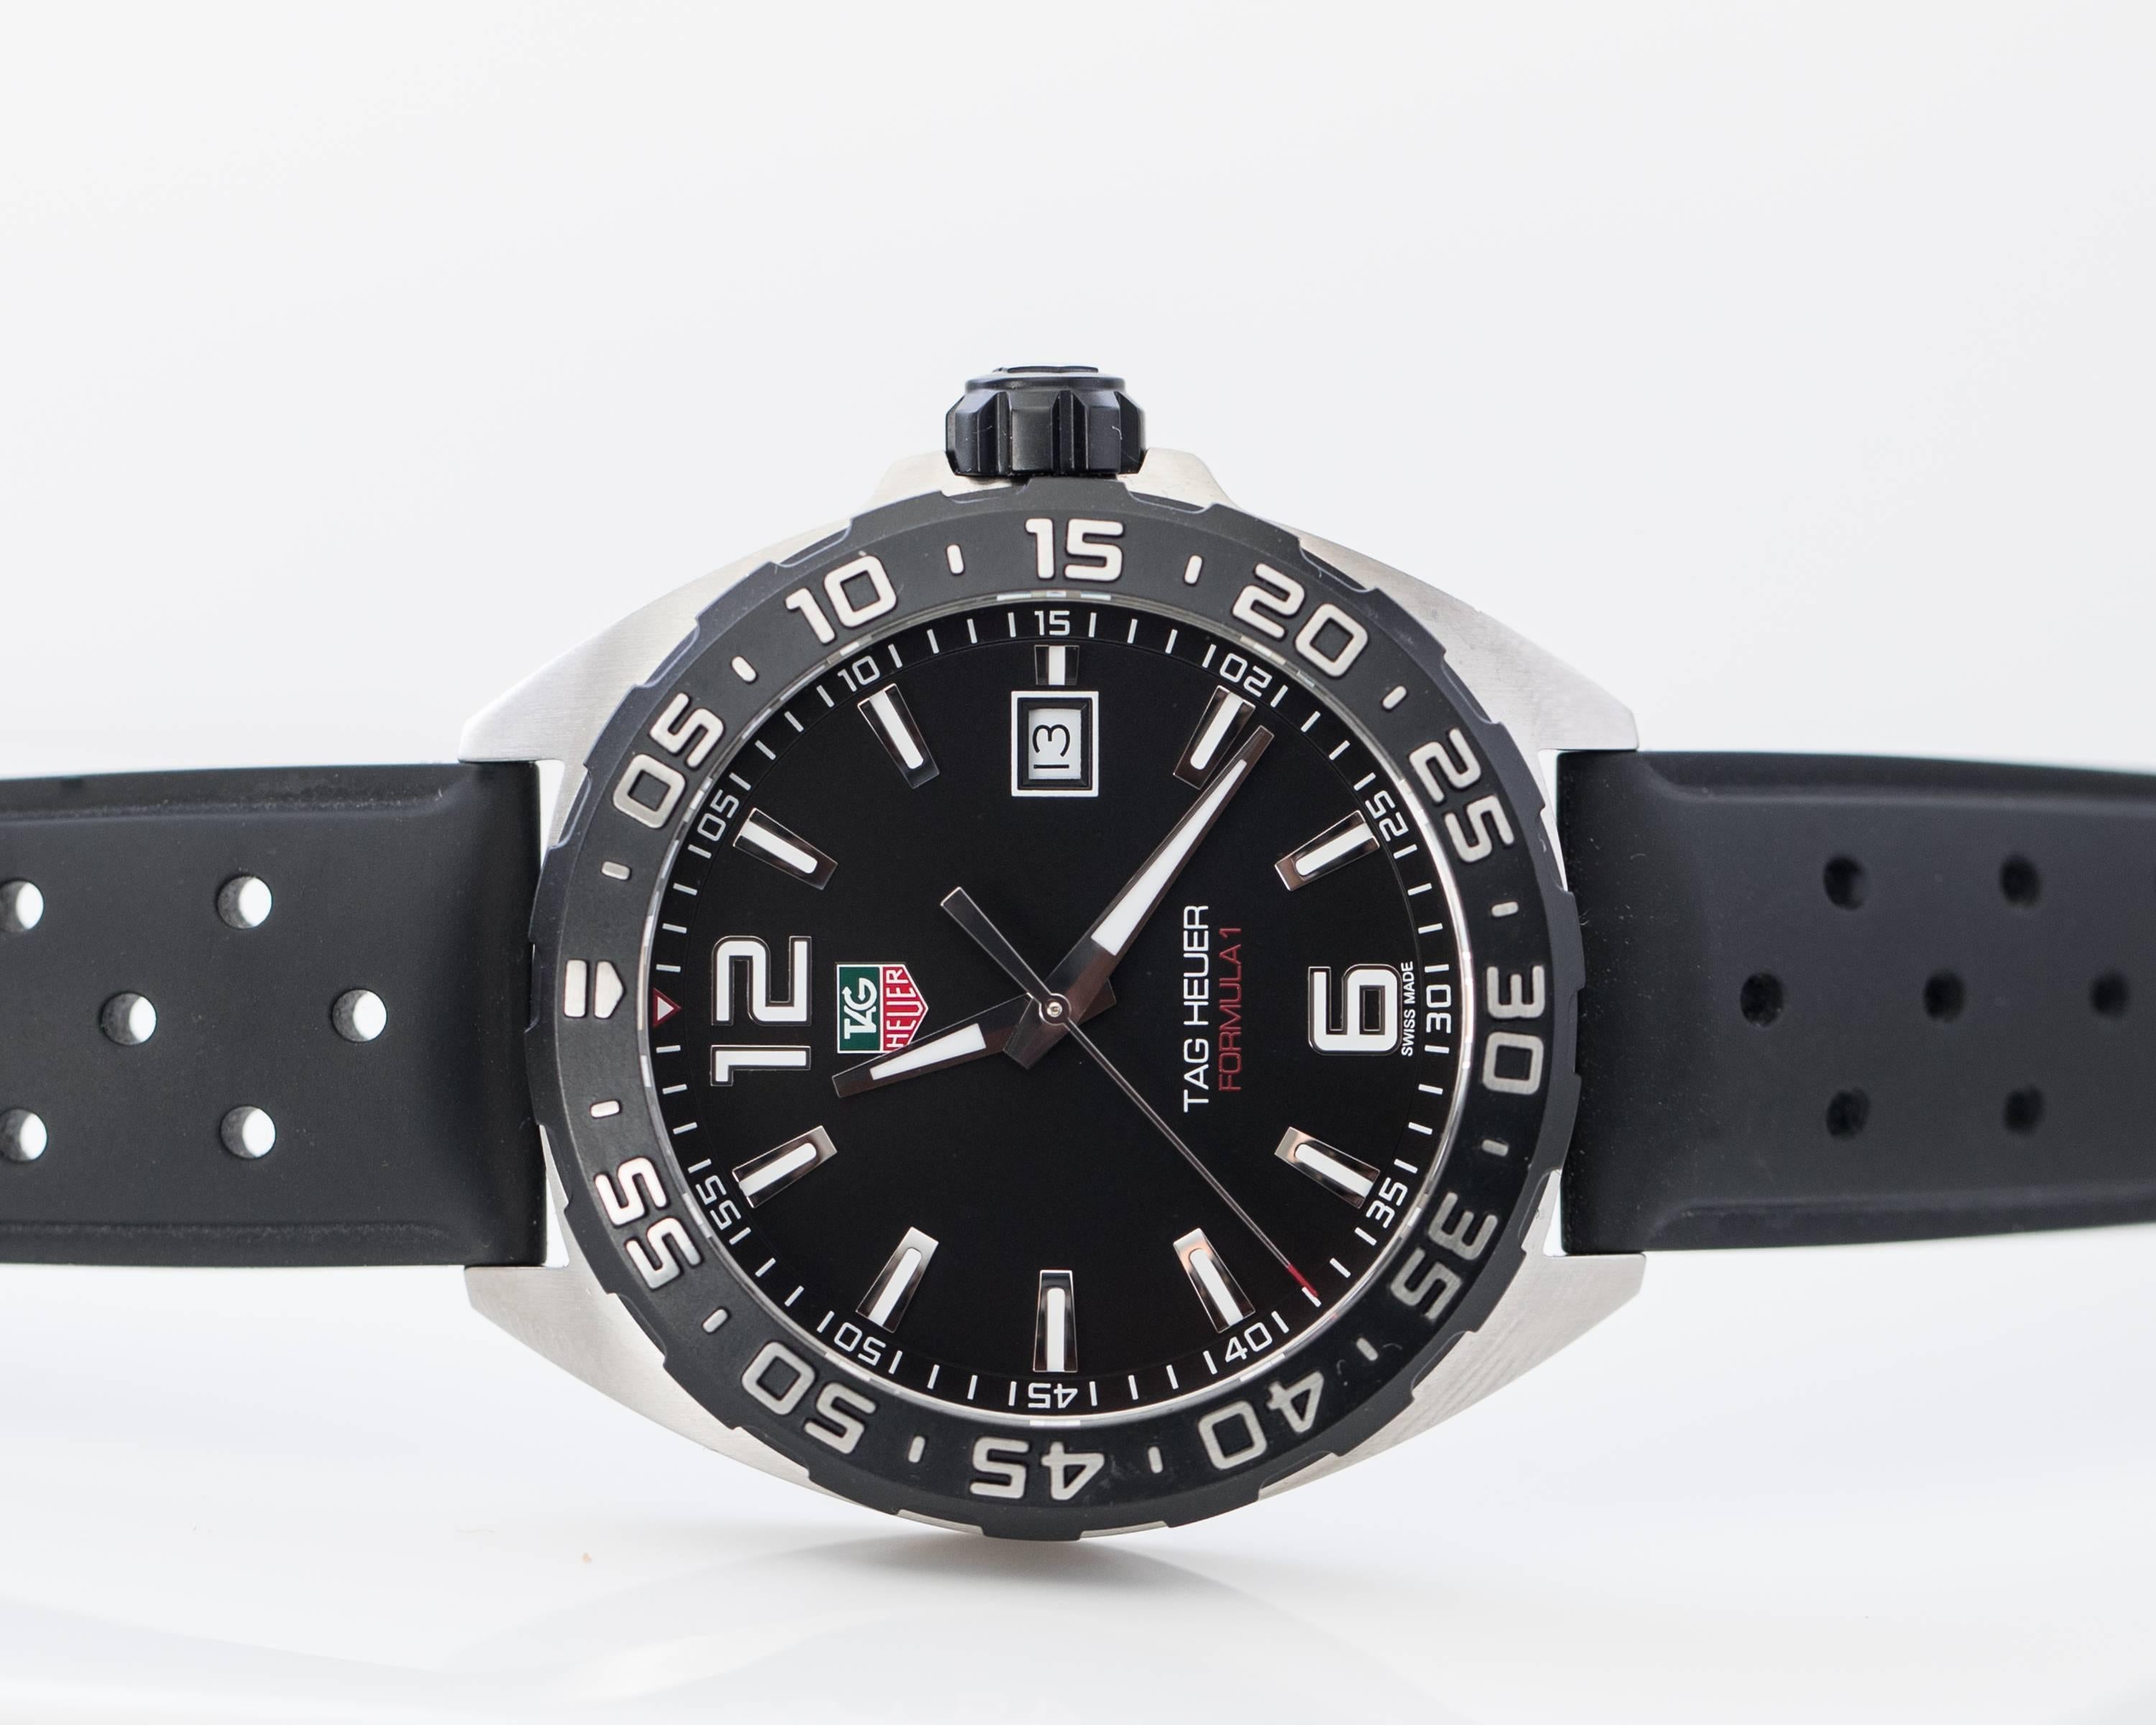 2014 Tag Heuer Formula 1 Stainless Steel 41 mm Watch with Rubber Strap. 
This Never Worn, Ultra Accurate Watch features a Black Rotating Bezel, Central Seconds Hand, Date Window at 3:00 and Black Arabic & Stick Dial with white hour markers and